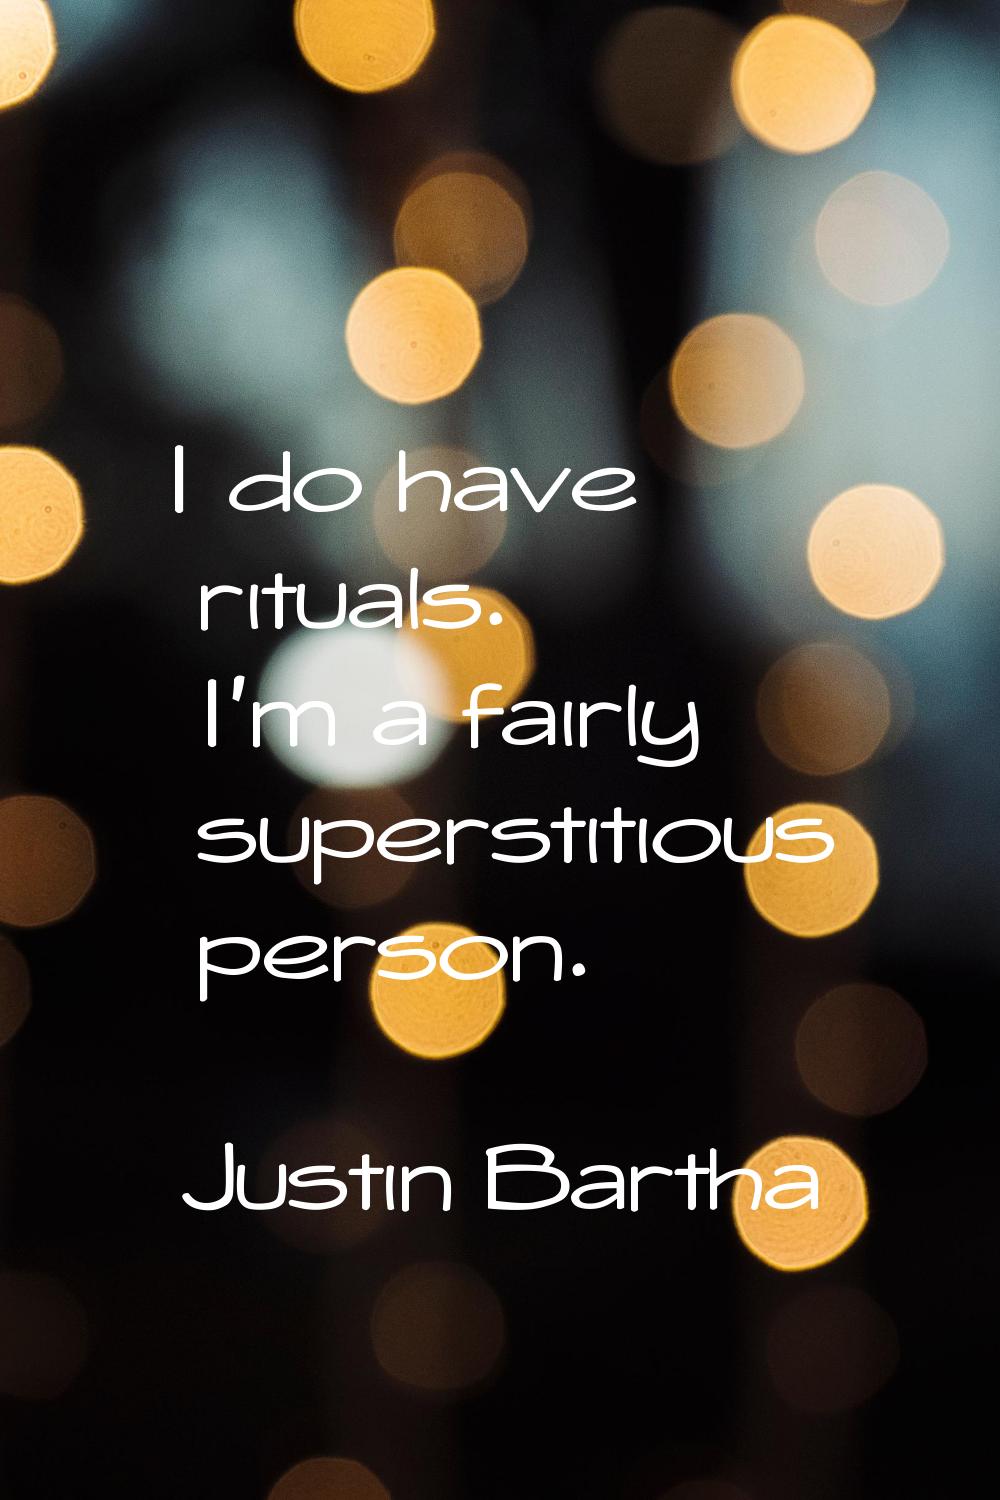 I do have rituals. I'm a fairly superstitious person.